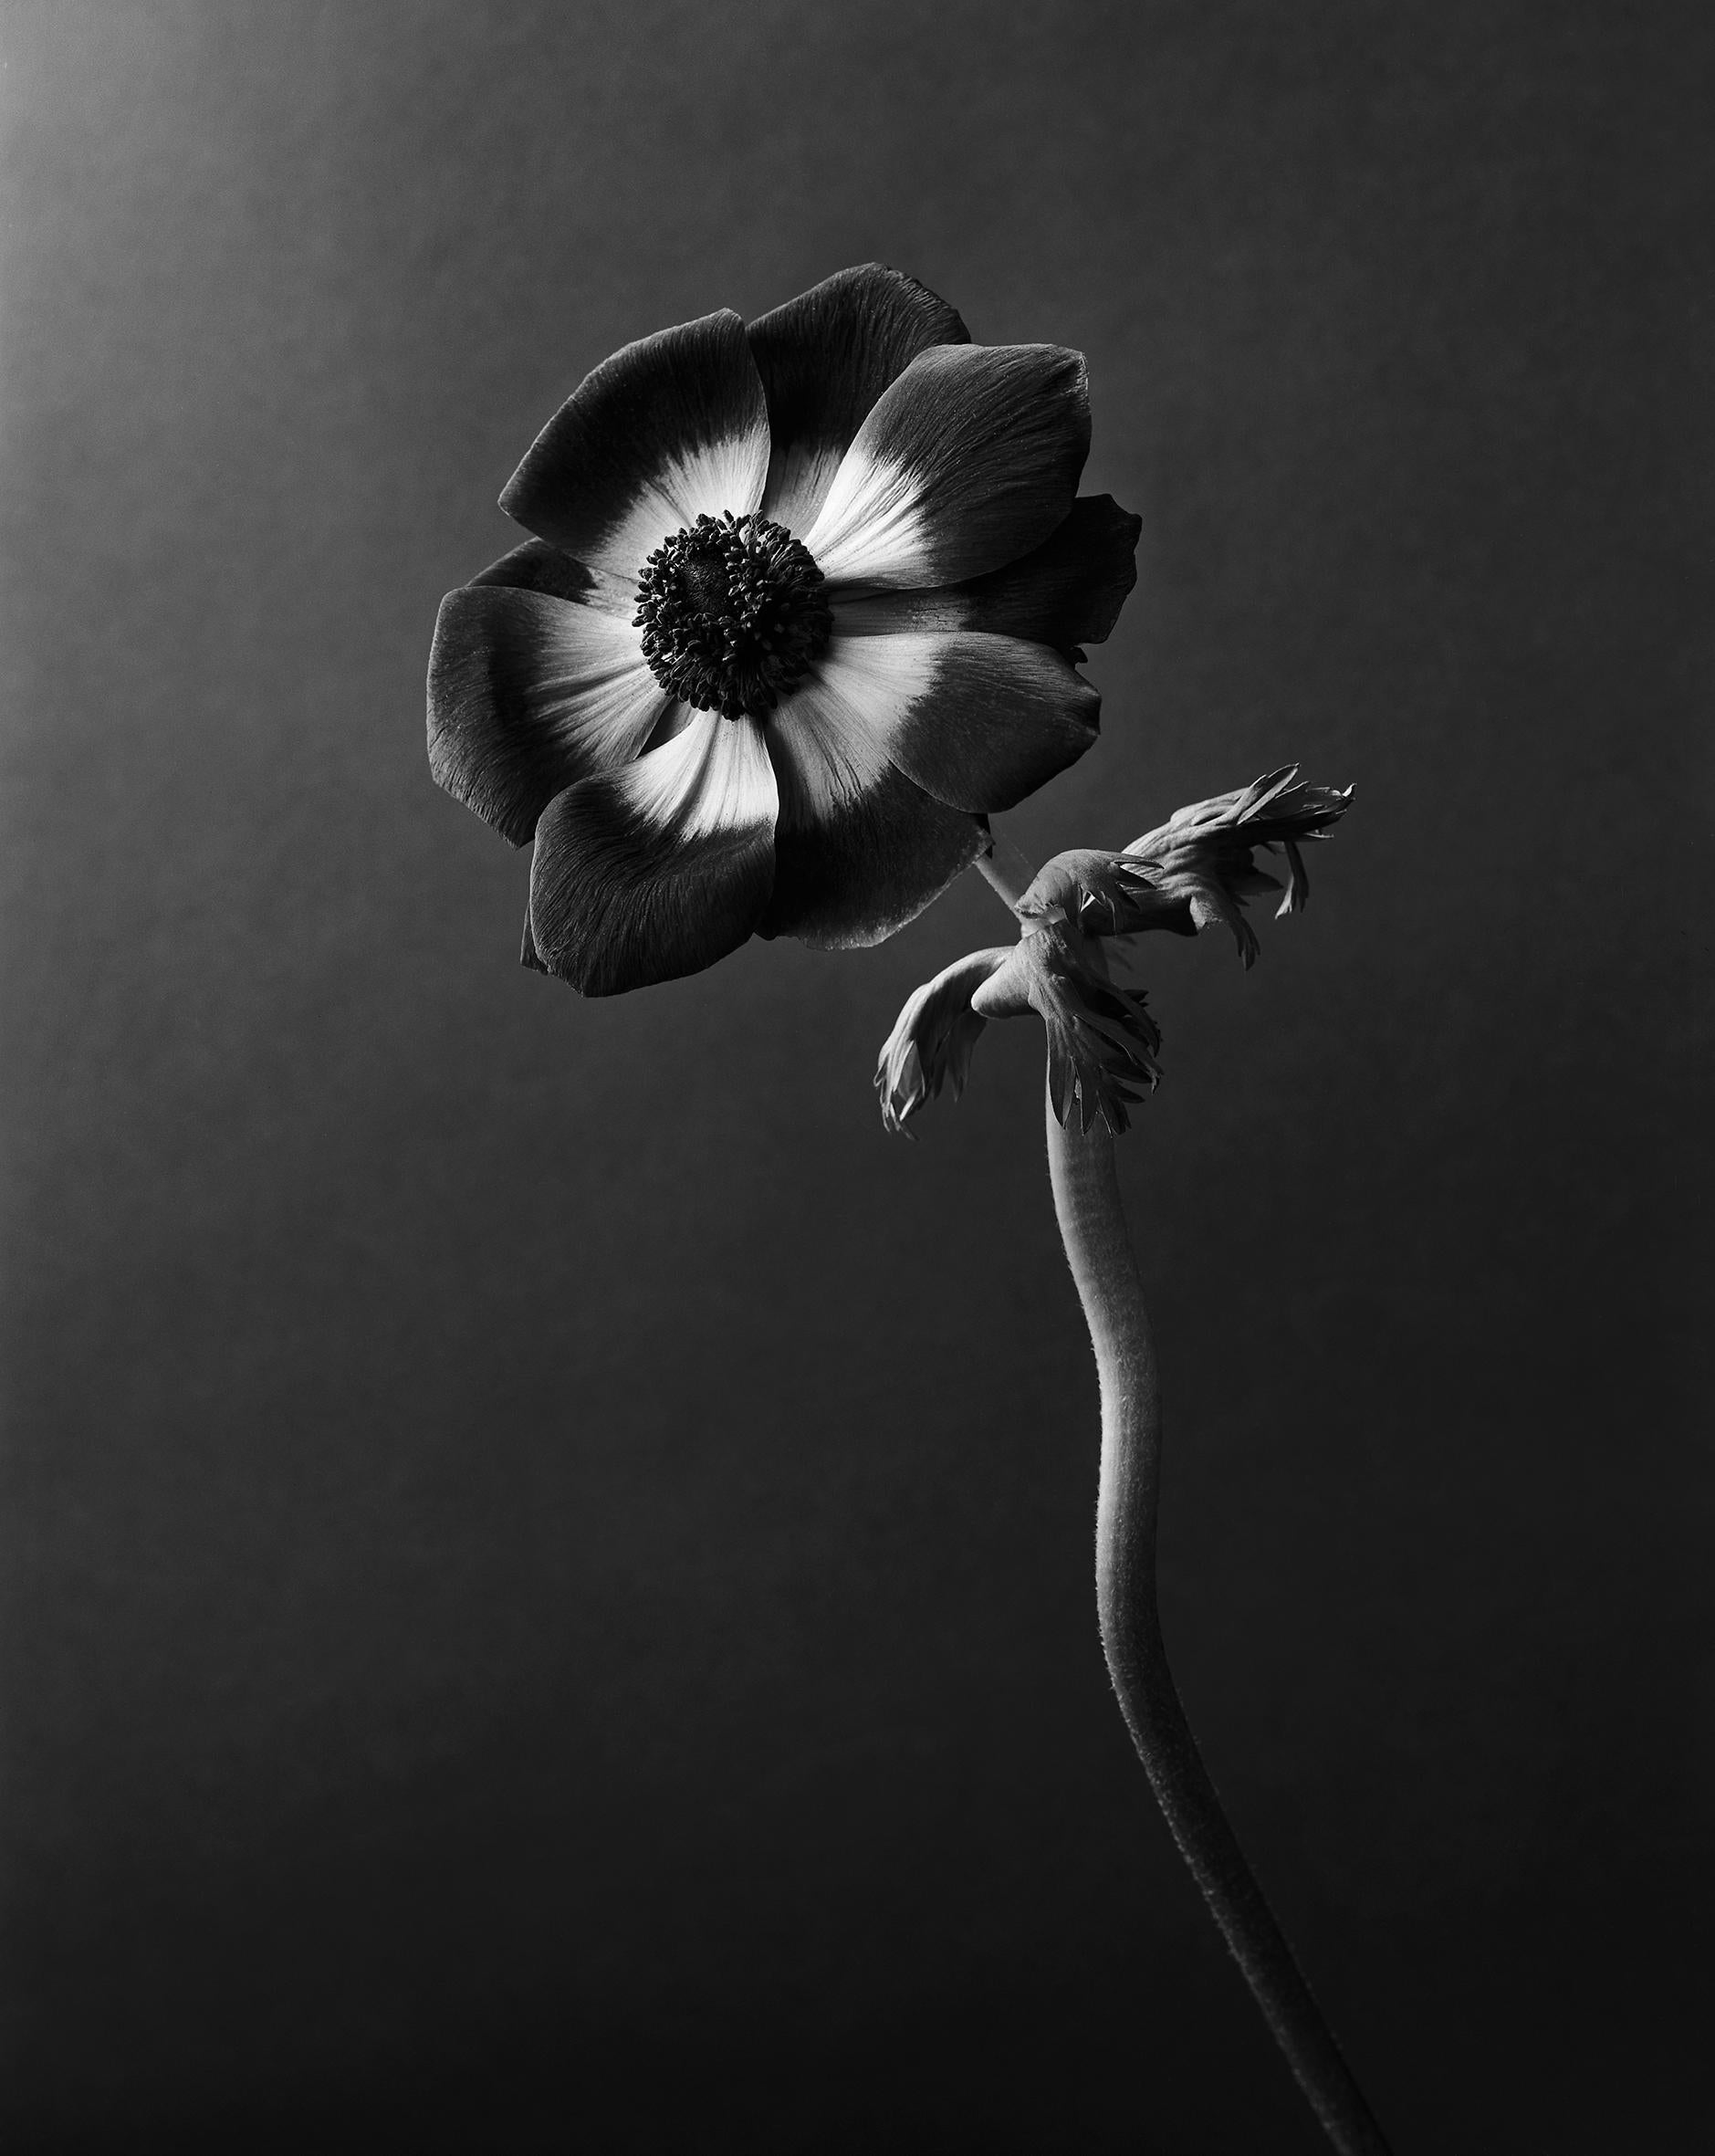 Ugne Pouwell Black and White Photograph -  Anemone - Analogue black and white floral photography, edition of 20